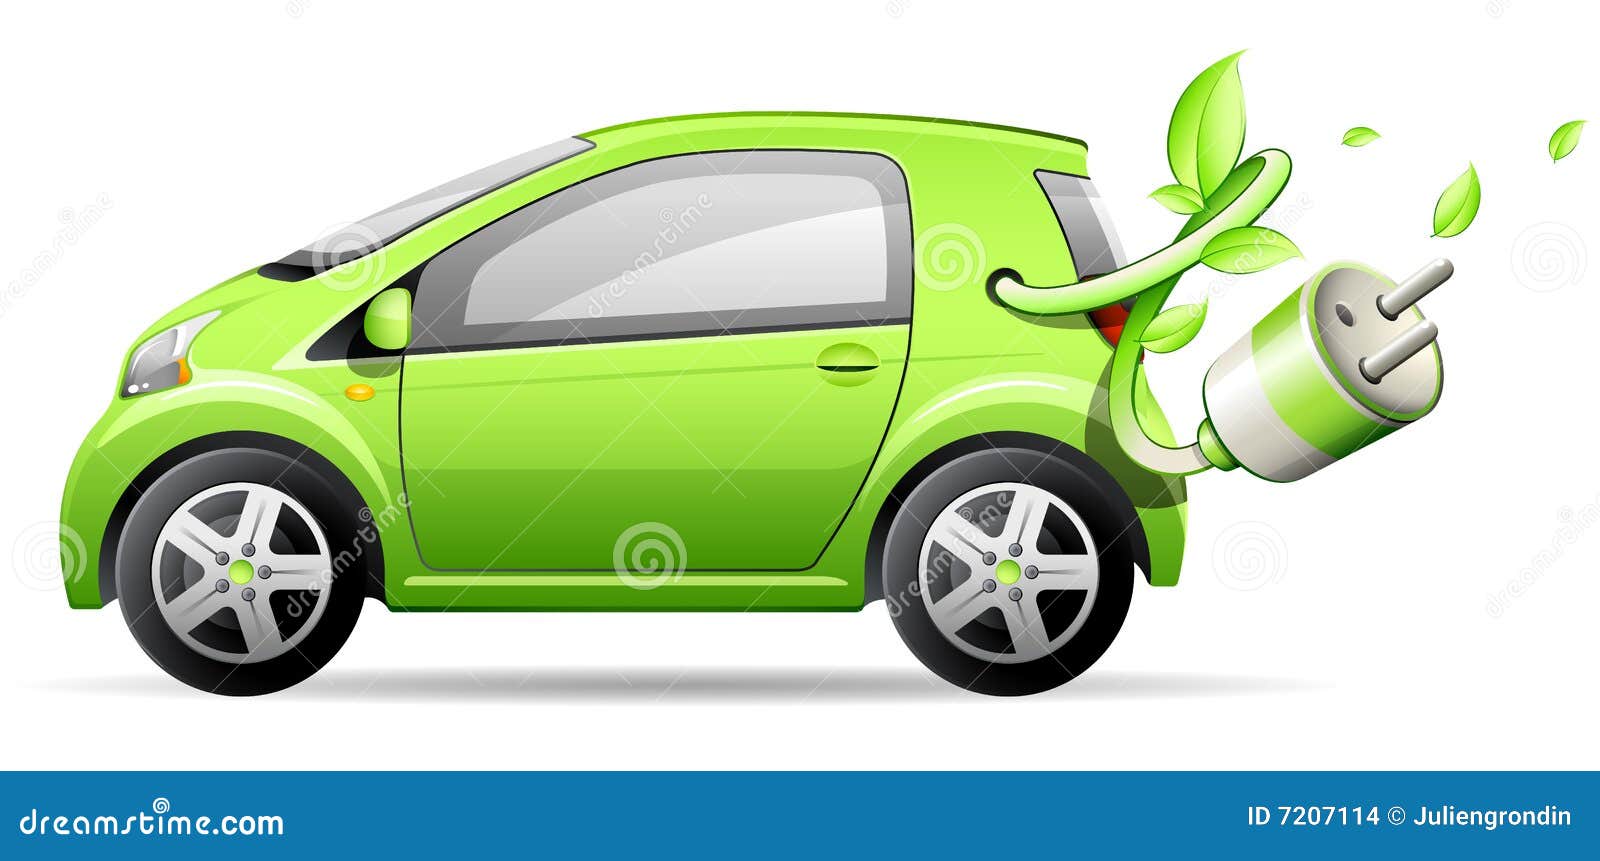 electric car clipart free - photo #39